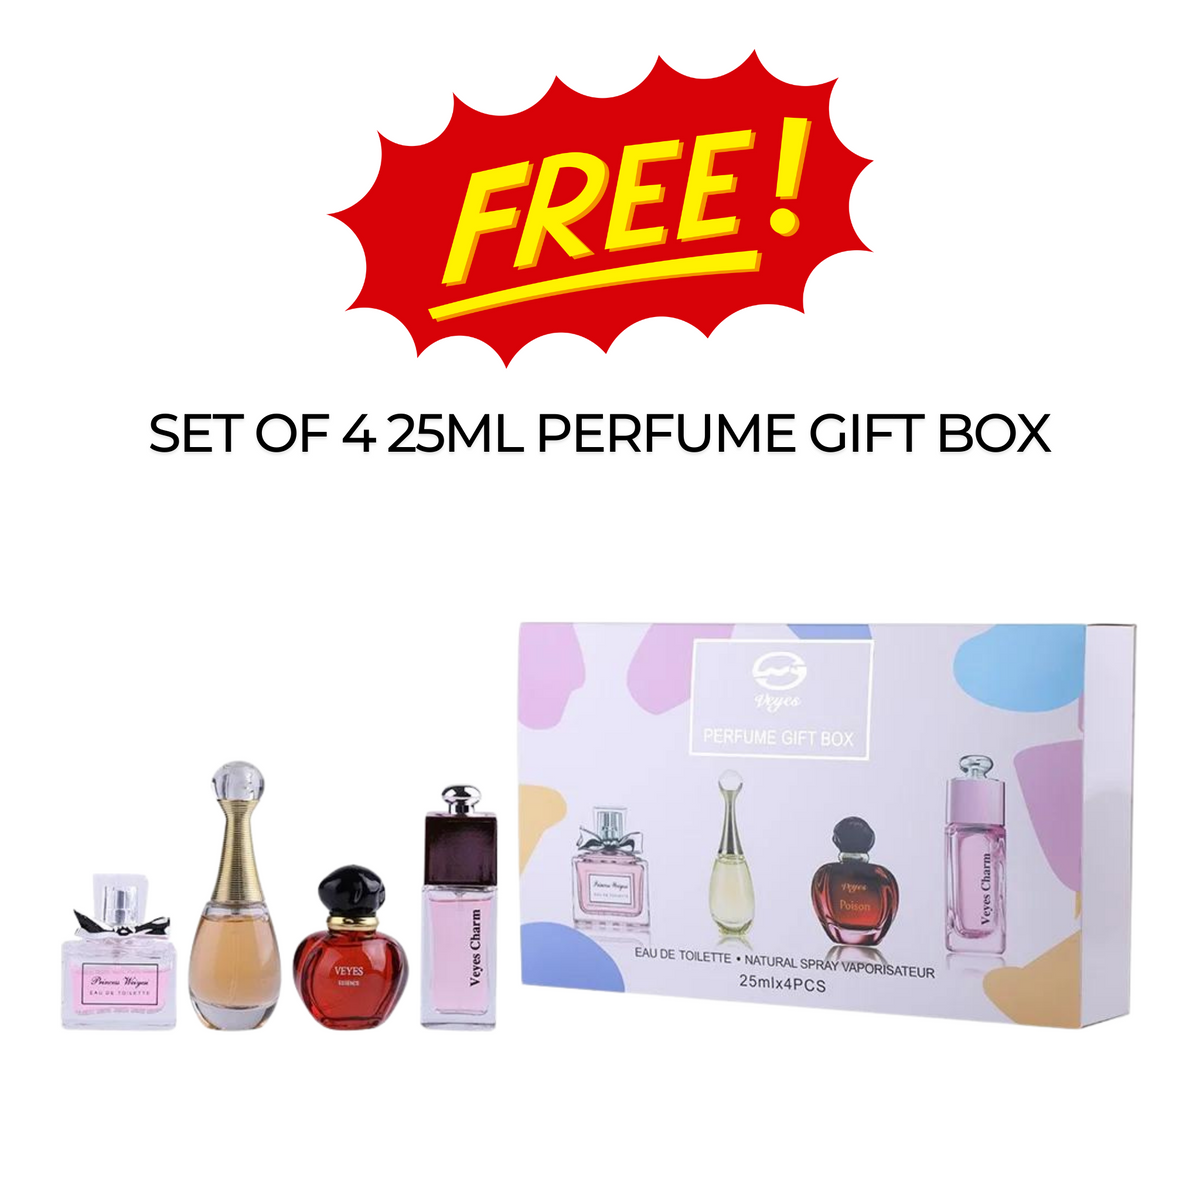 Pack of 5 Luxury 2 Men's, 2 Women's Perfumes With Free Gift